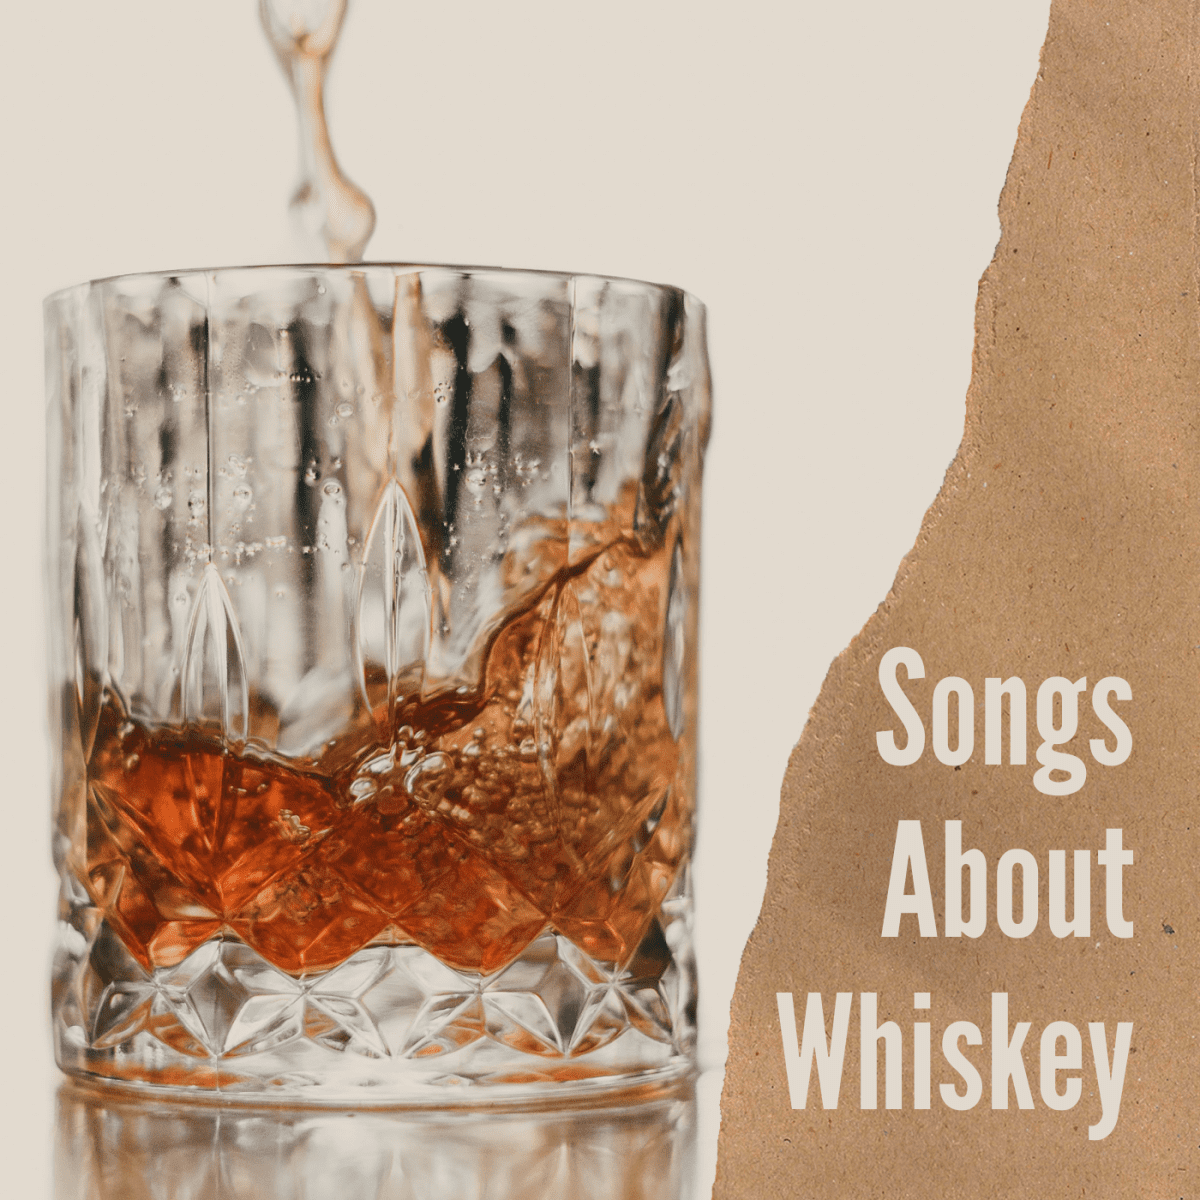 83 Songs About Whiskey - Spinditty